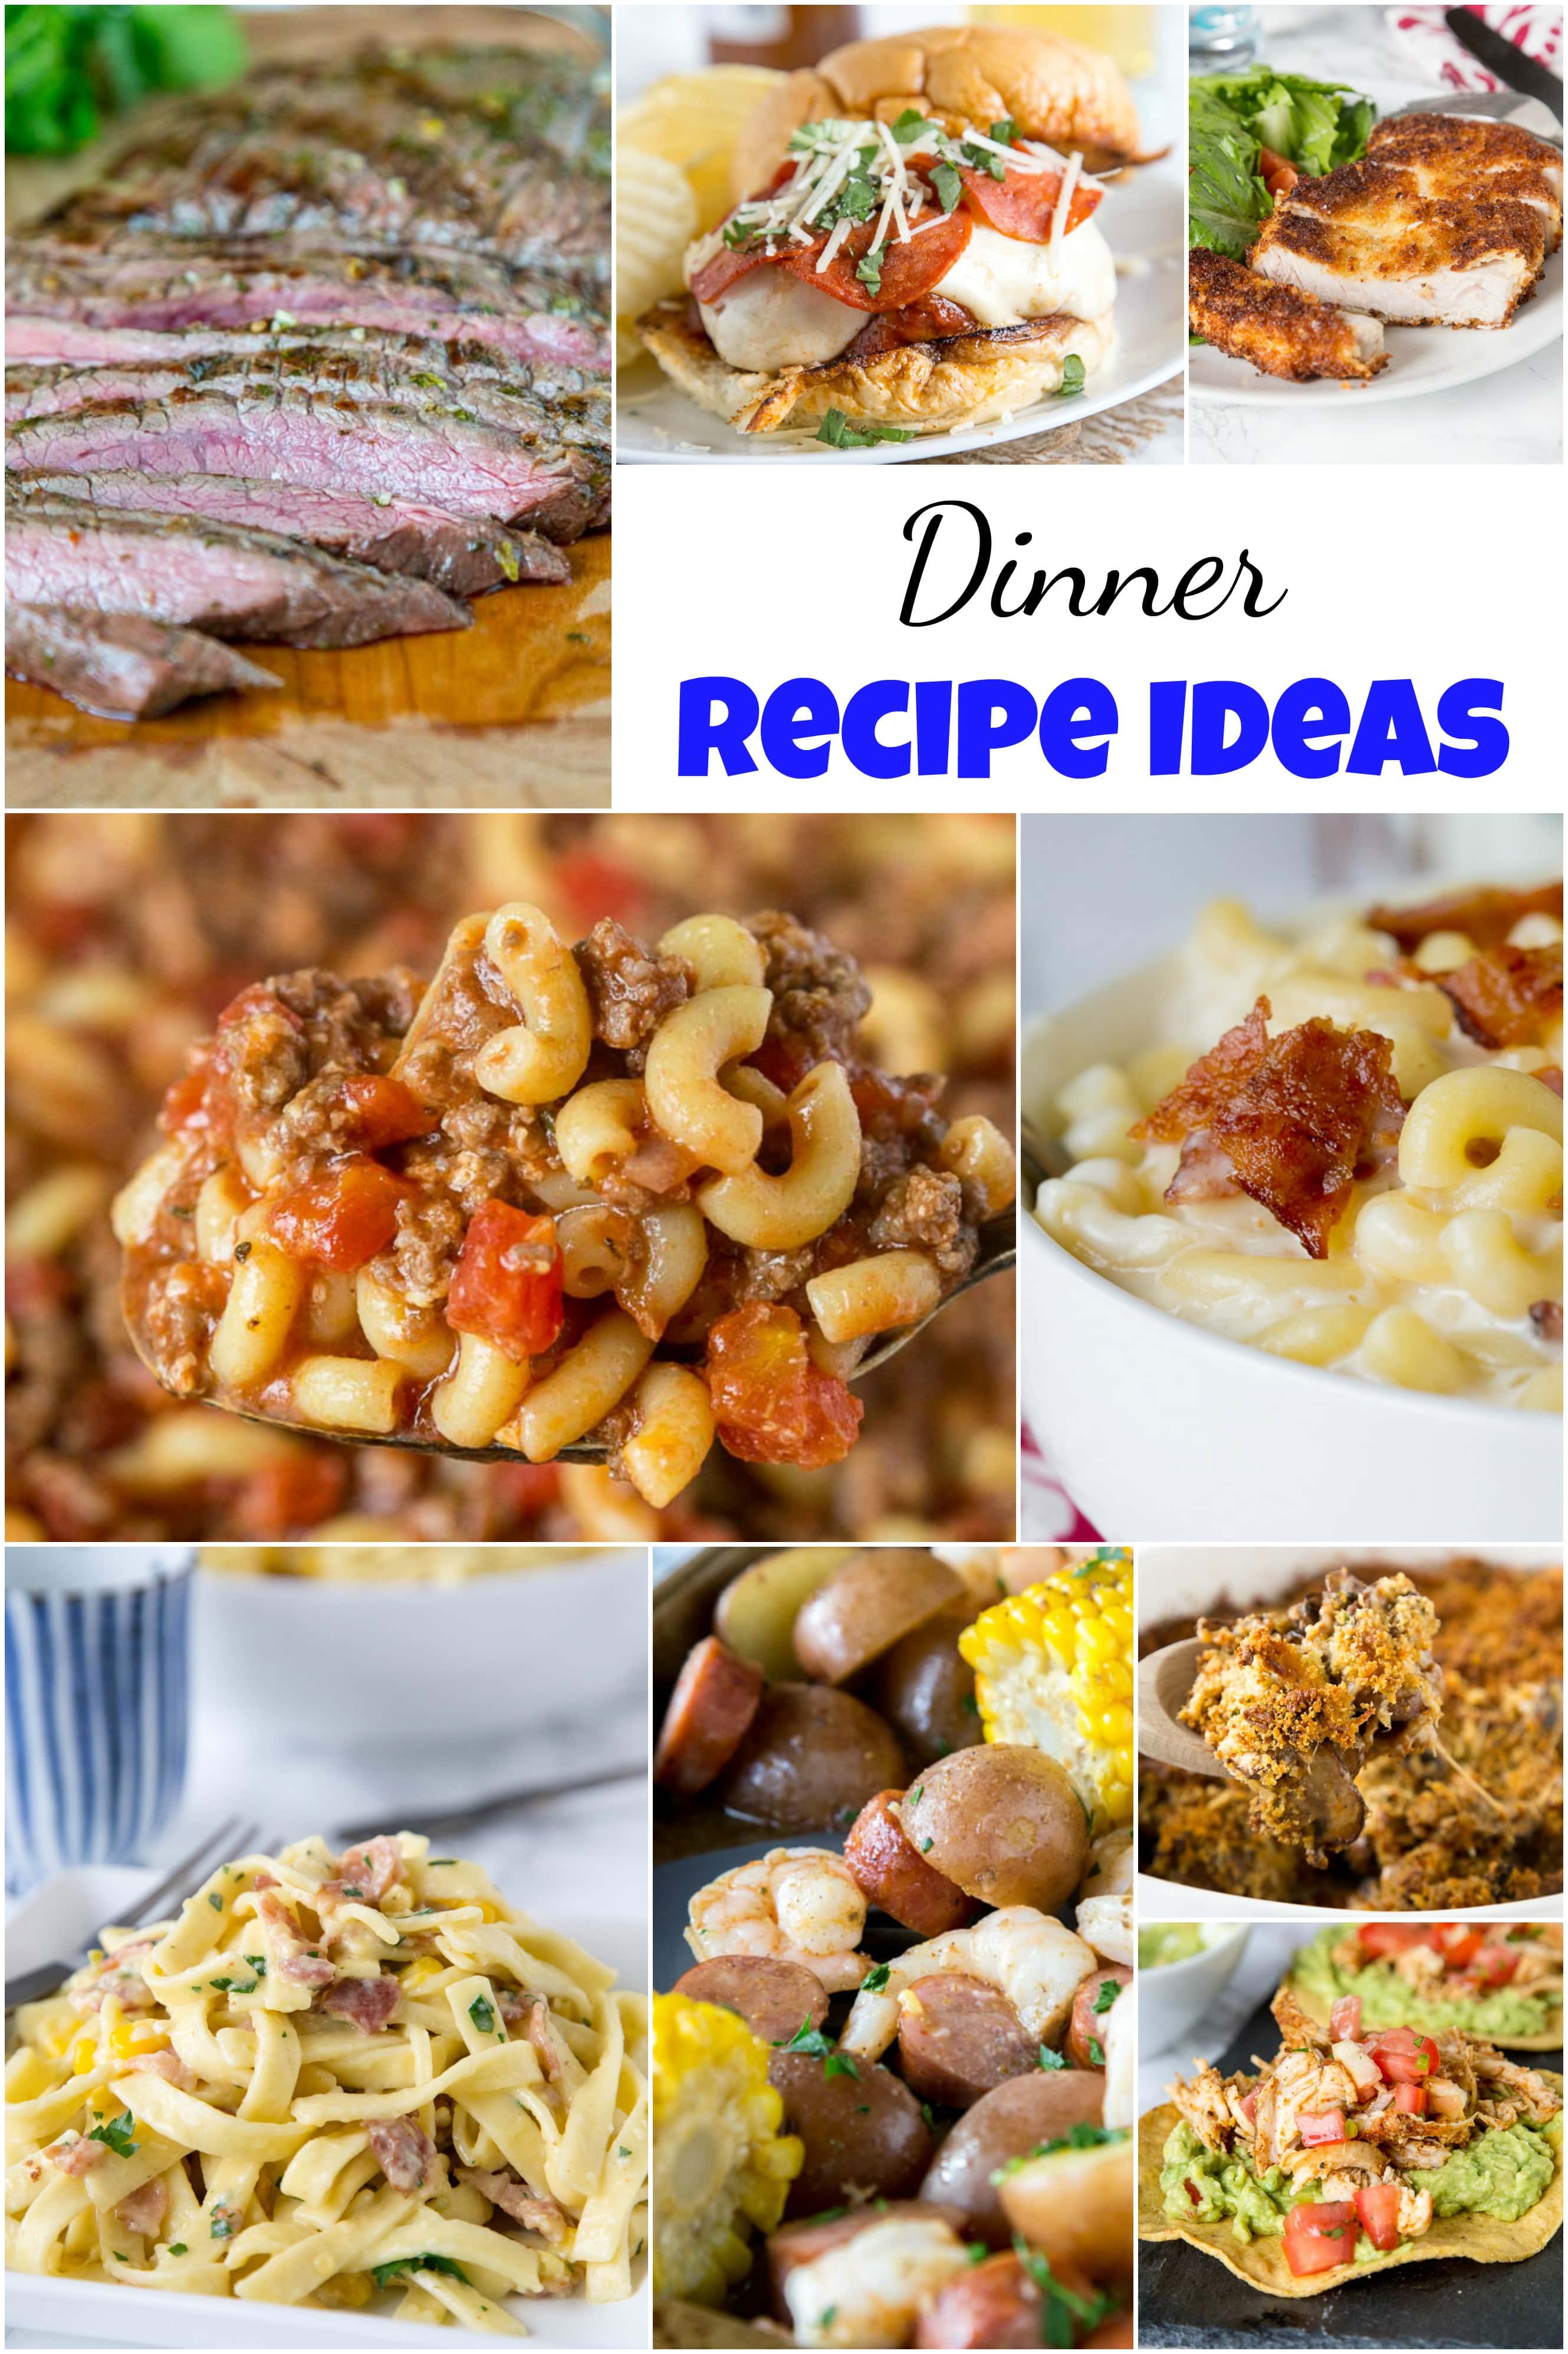 Dinner Recipe Ideas - Need some new ideas to mix up dinner?  Here are 25 easy, fast, and great dinner recipes that will liven up your week! #dinnertime #dinnerisserved #dinnerrecipes #dinnerideas #roundup #food #recipes